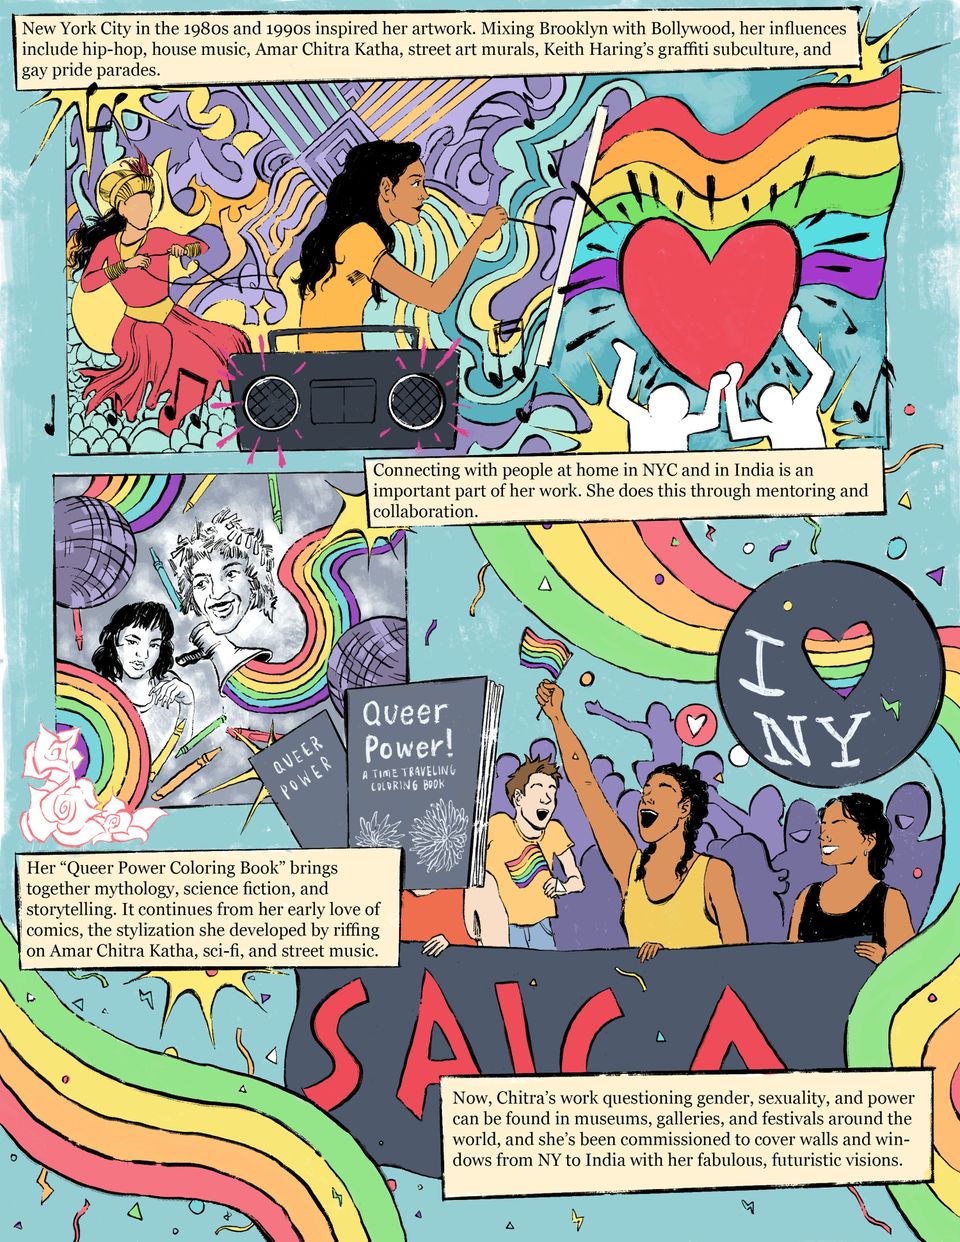 Illustrations and written detail of Chitra’s artistic influences that led to her coloring book; including street art, Indian comics, and LGBTQ+ pride.